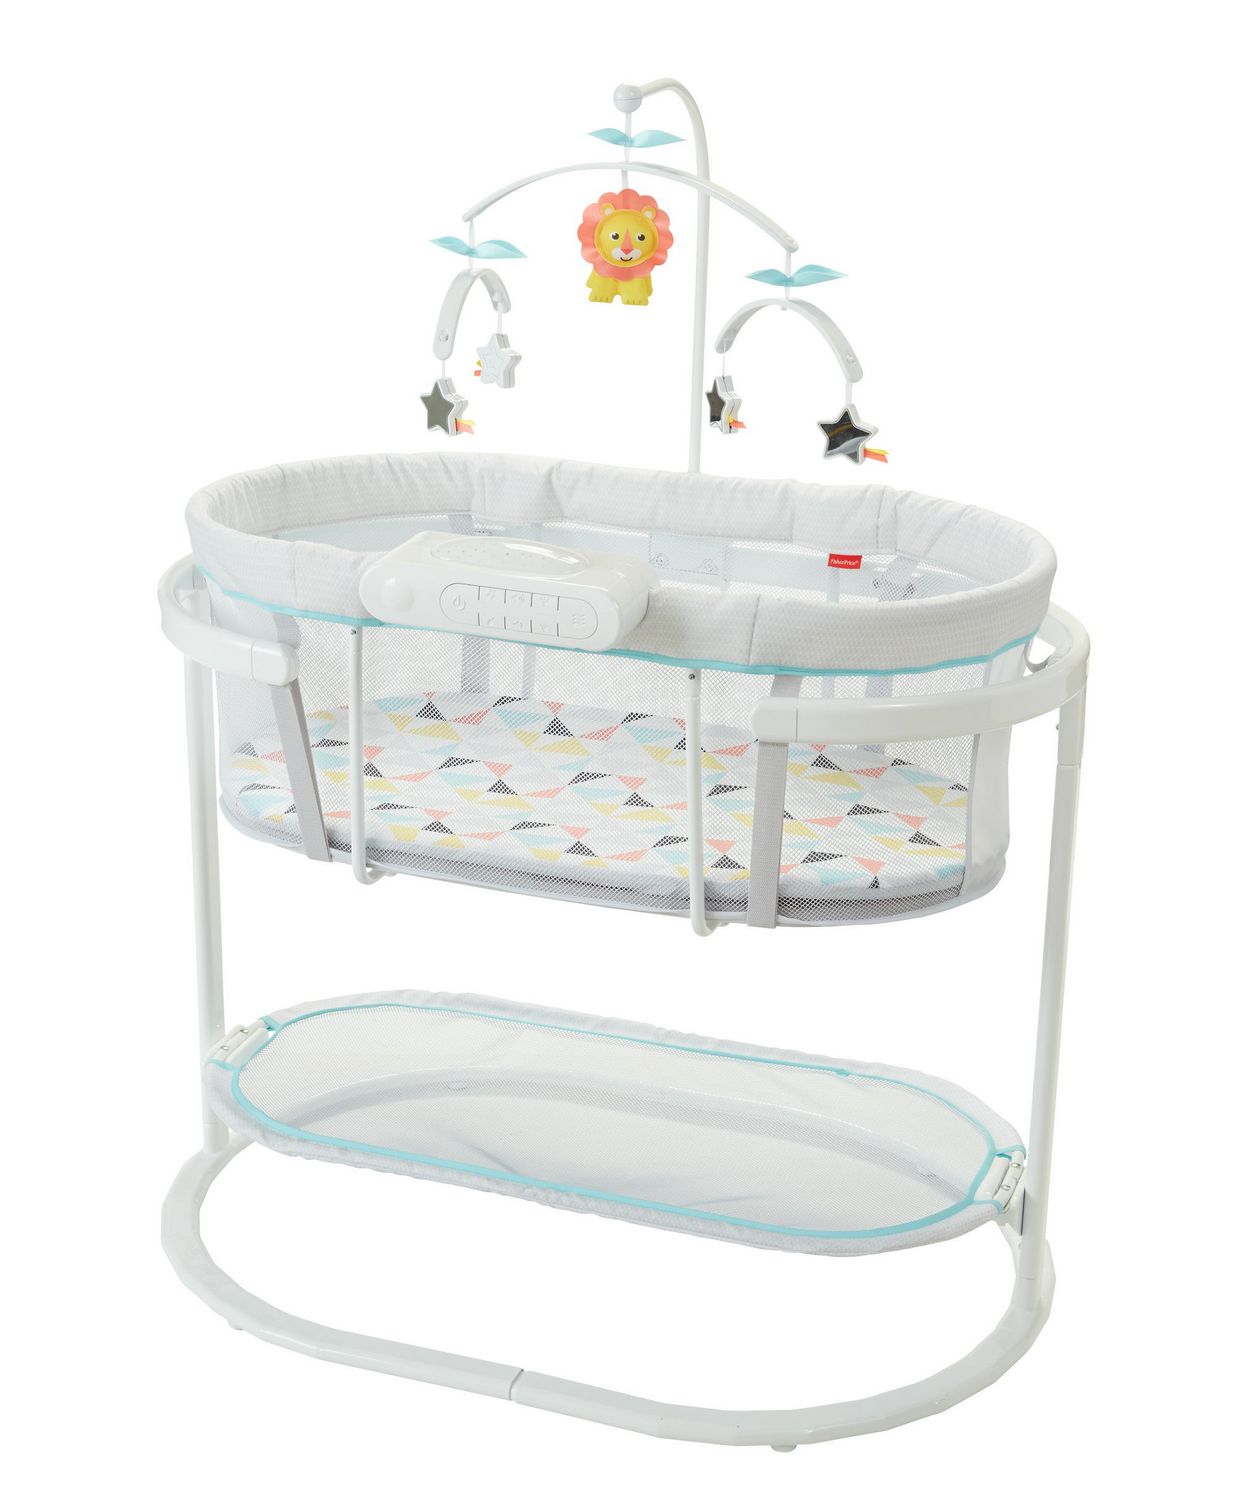 daycare sleeping cot